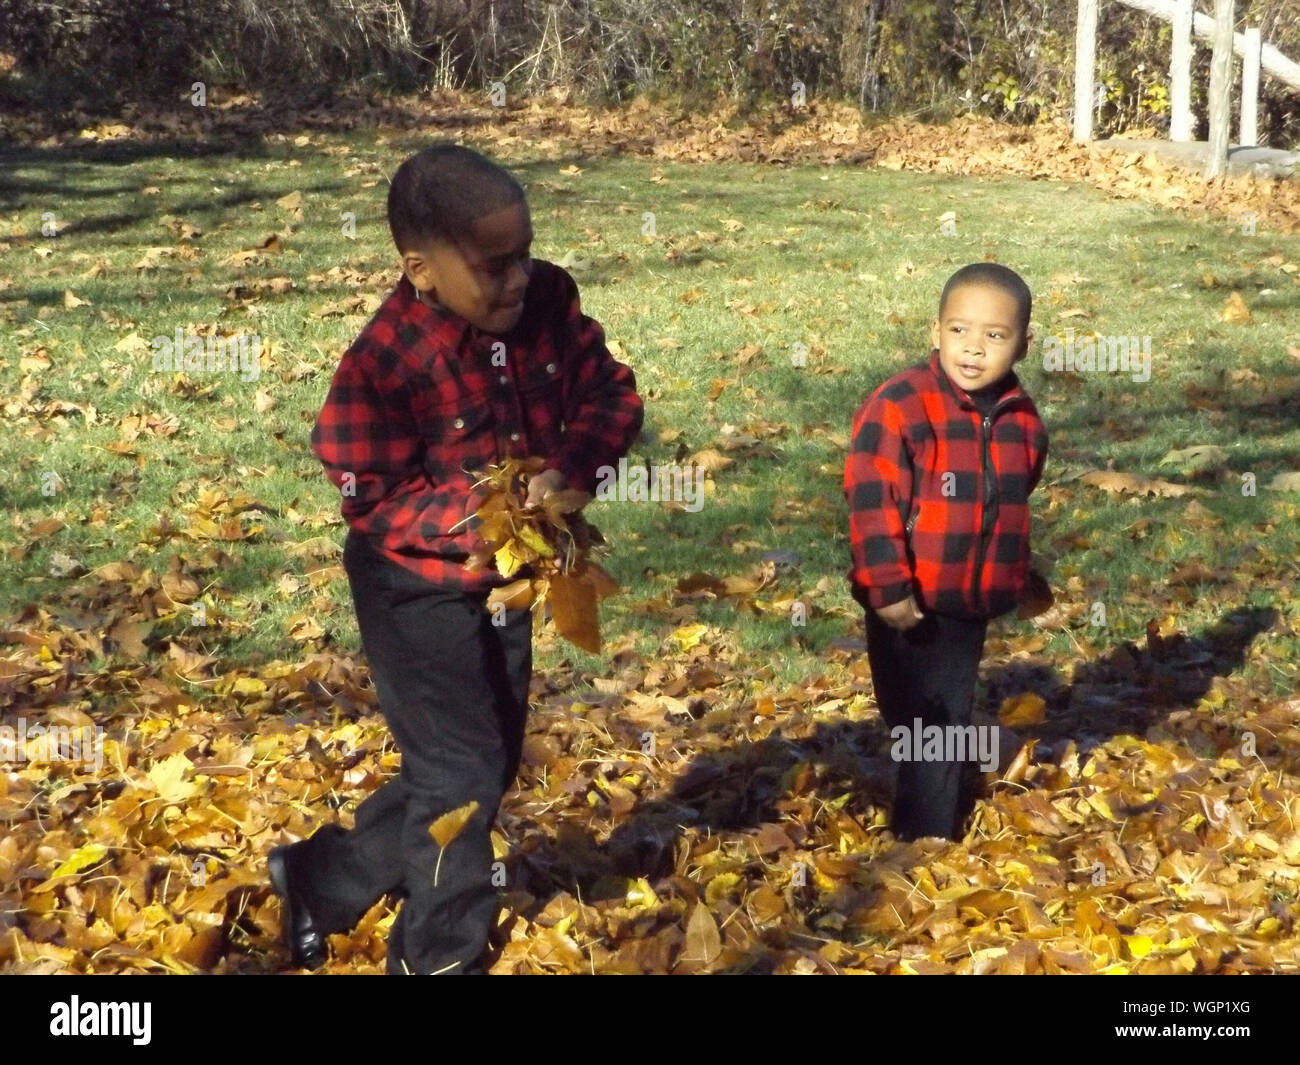 Brothers On Fallen Autumn Leaves At Park Stock Photo